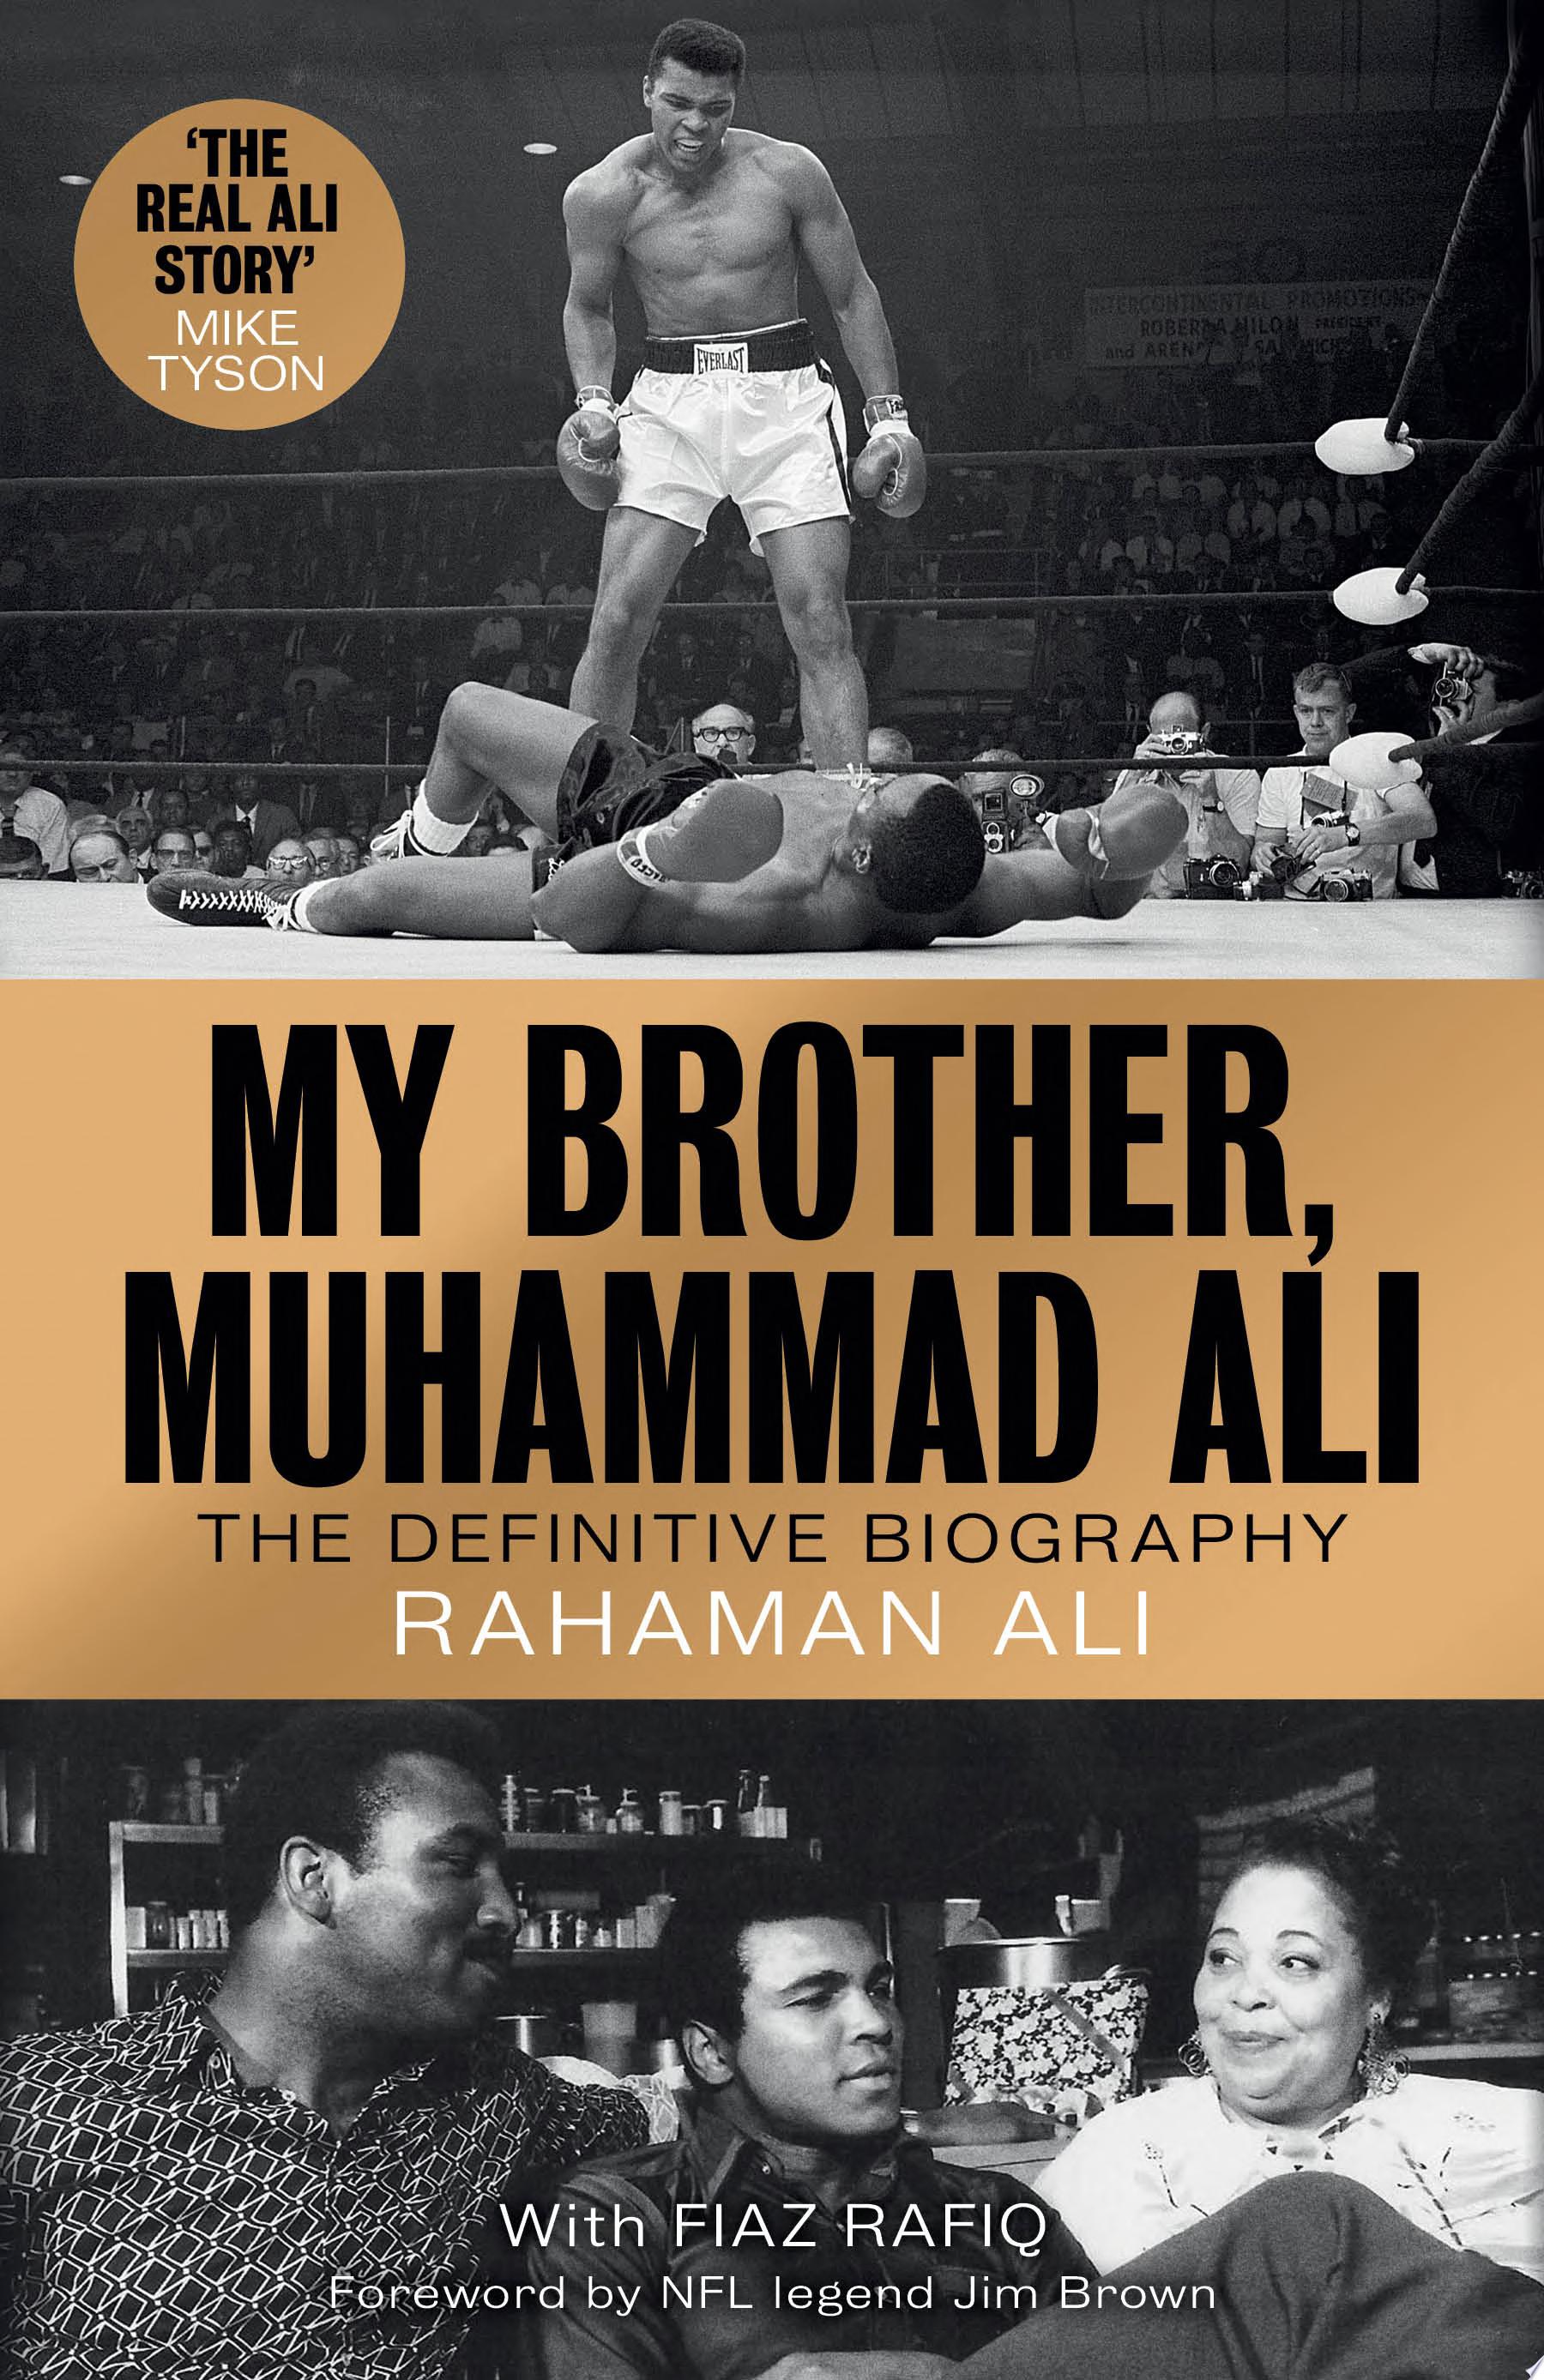 Image for "My Brother, Muhammad Ali"